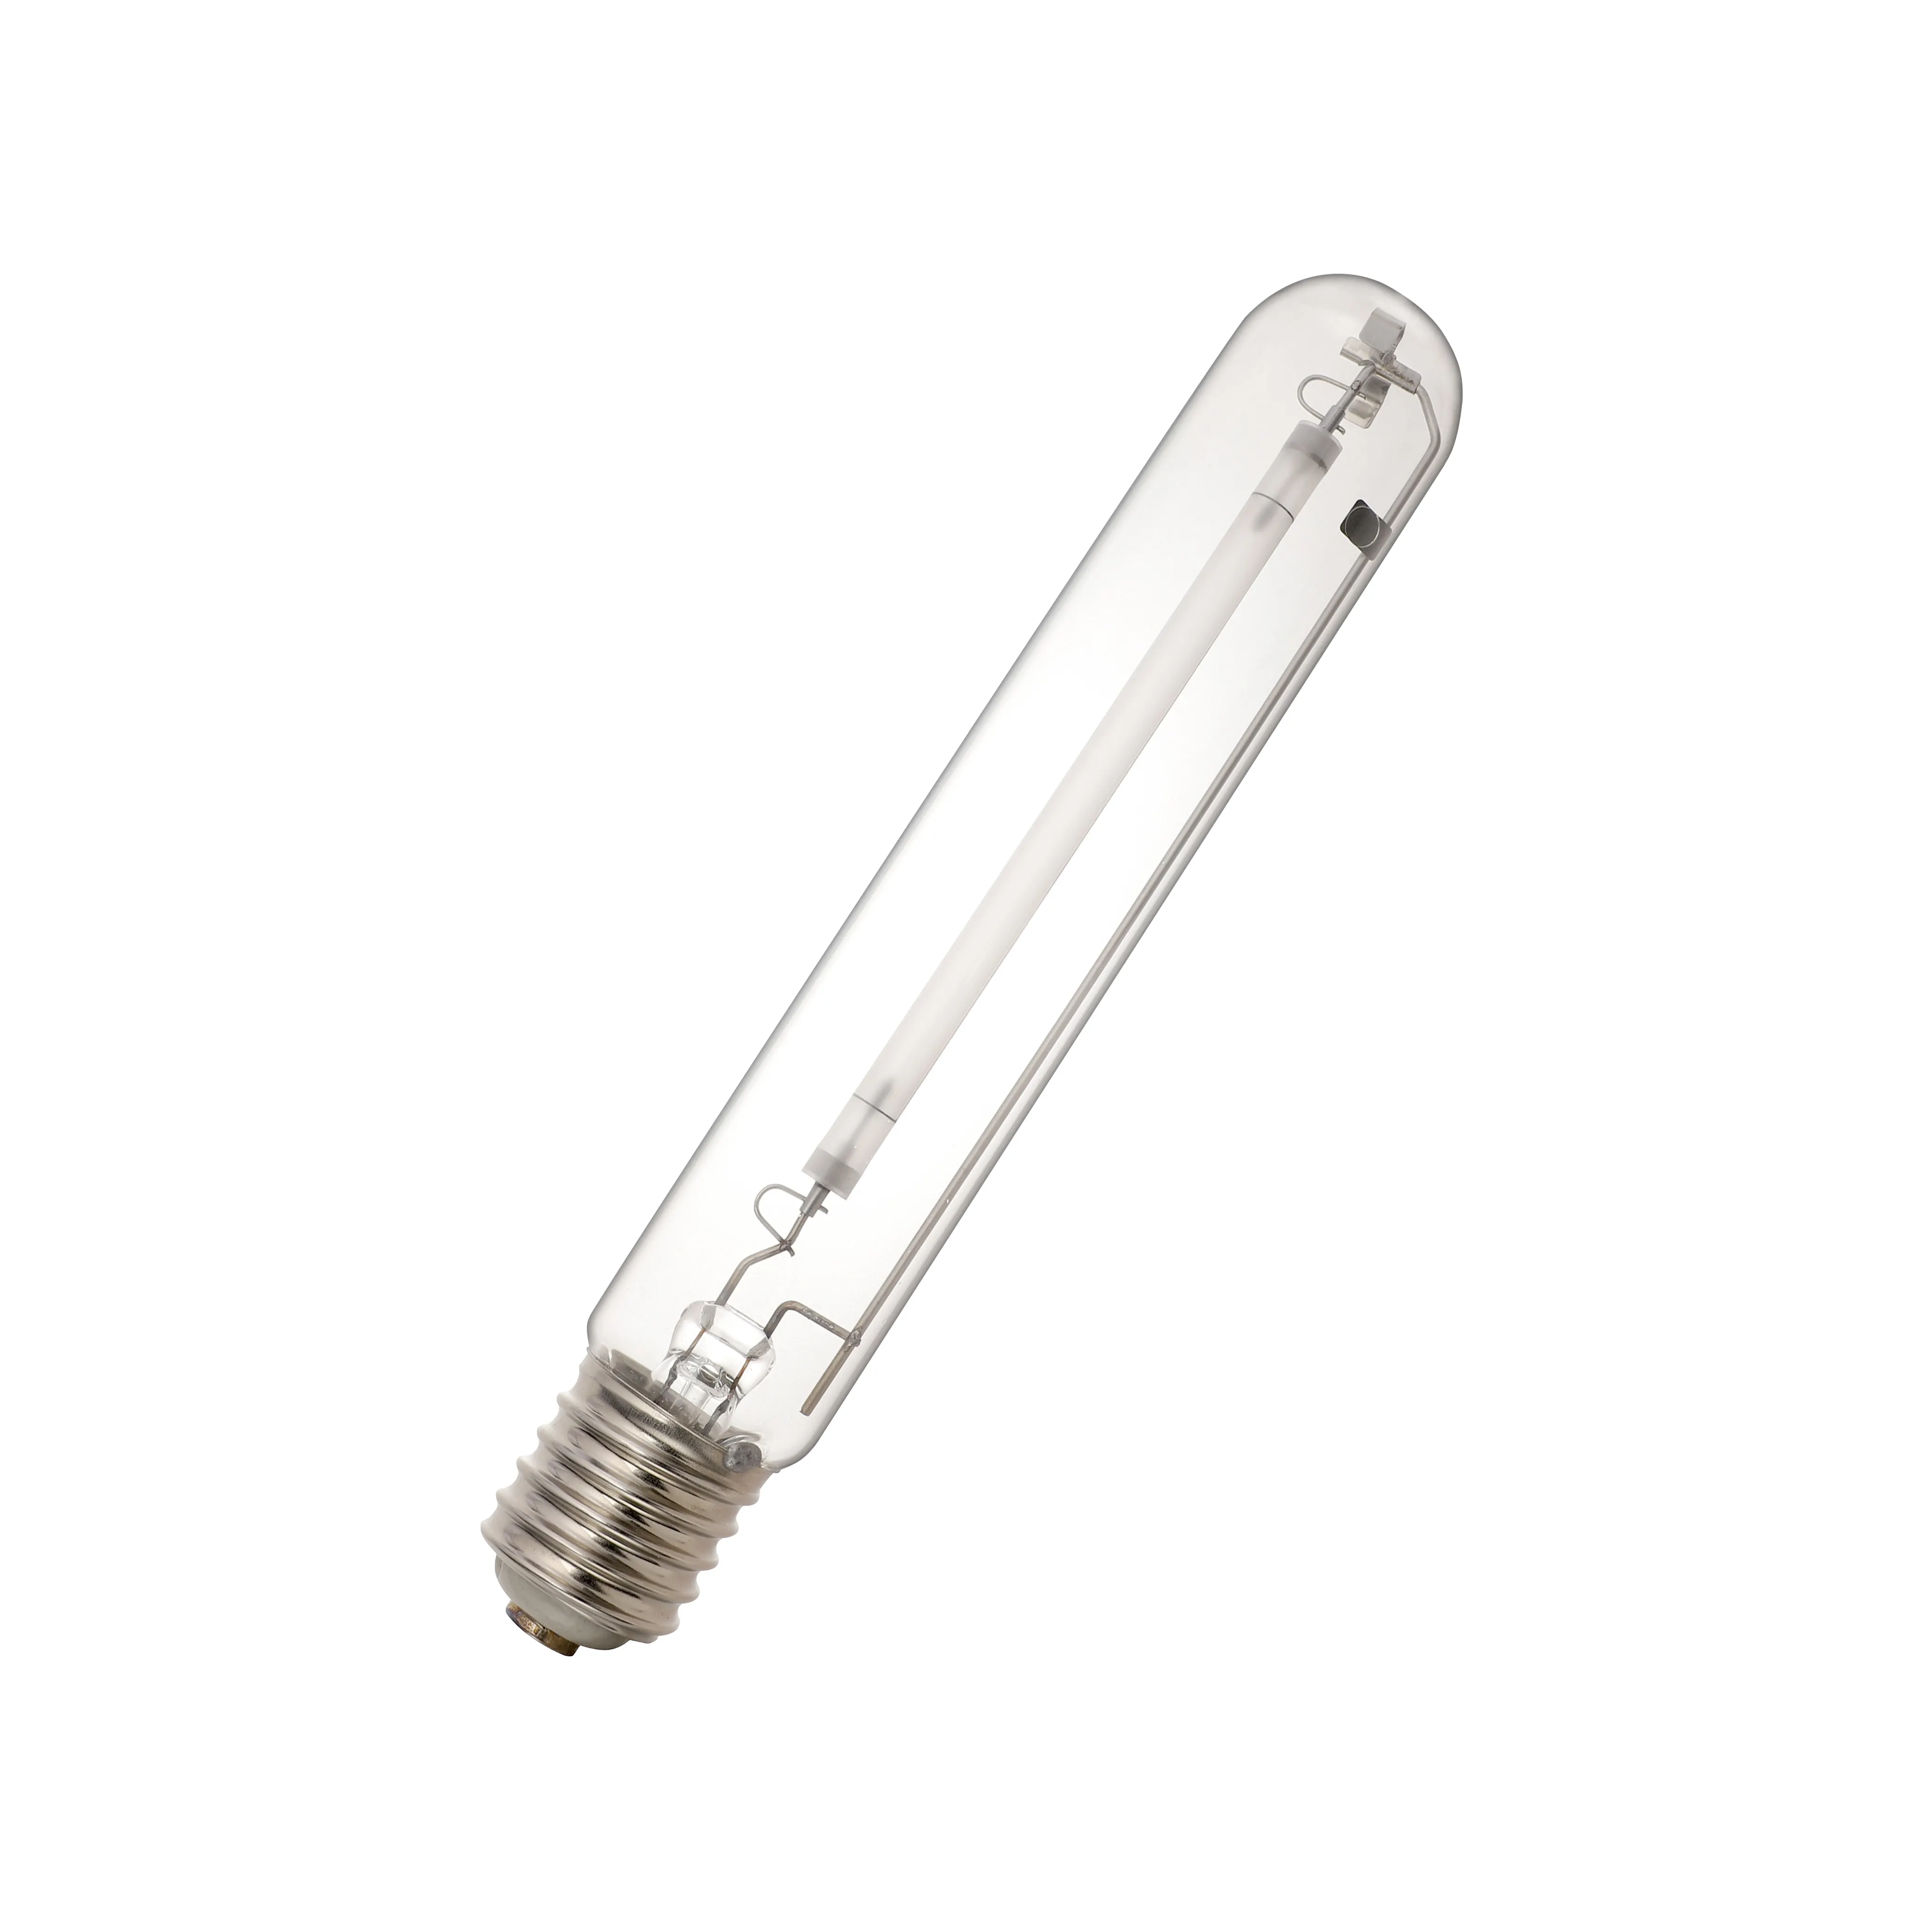 600W watt high pressure sodium lamp super hps grow bulb with best quality and price